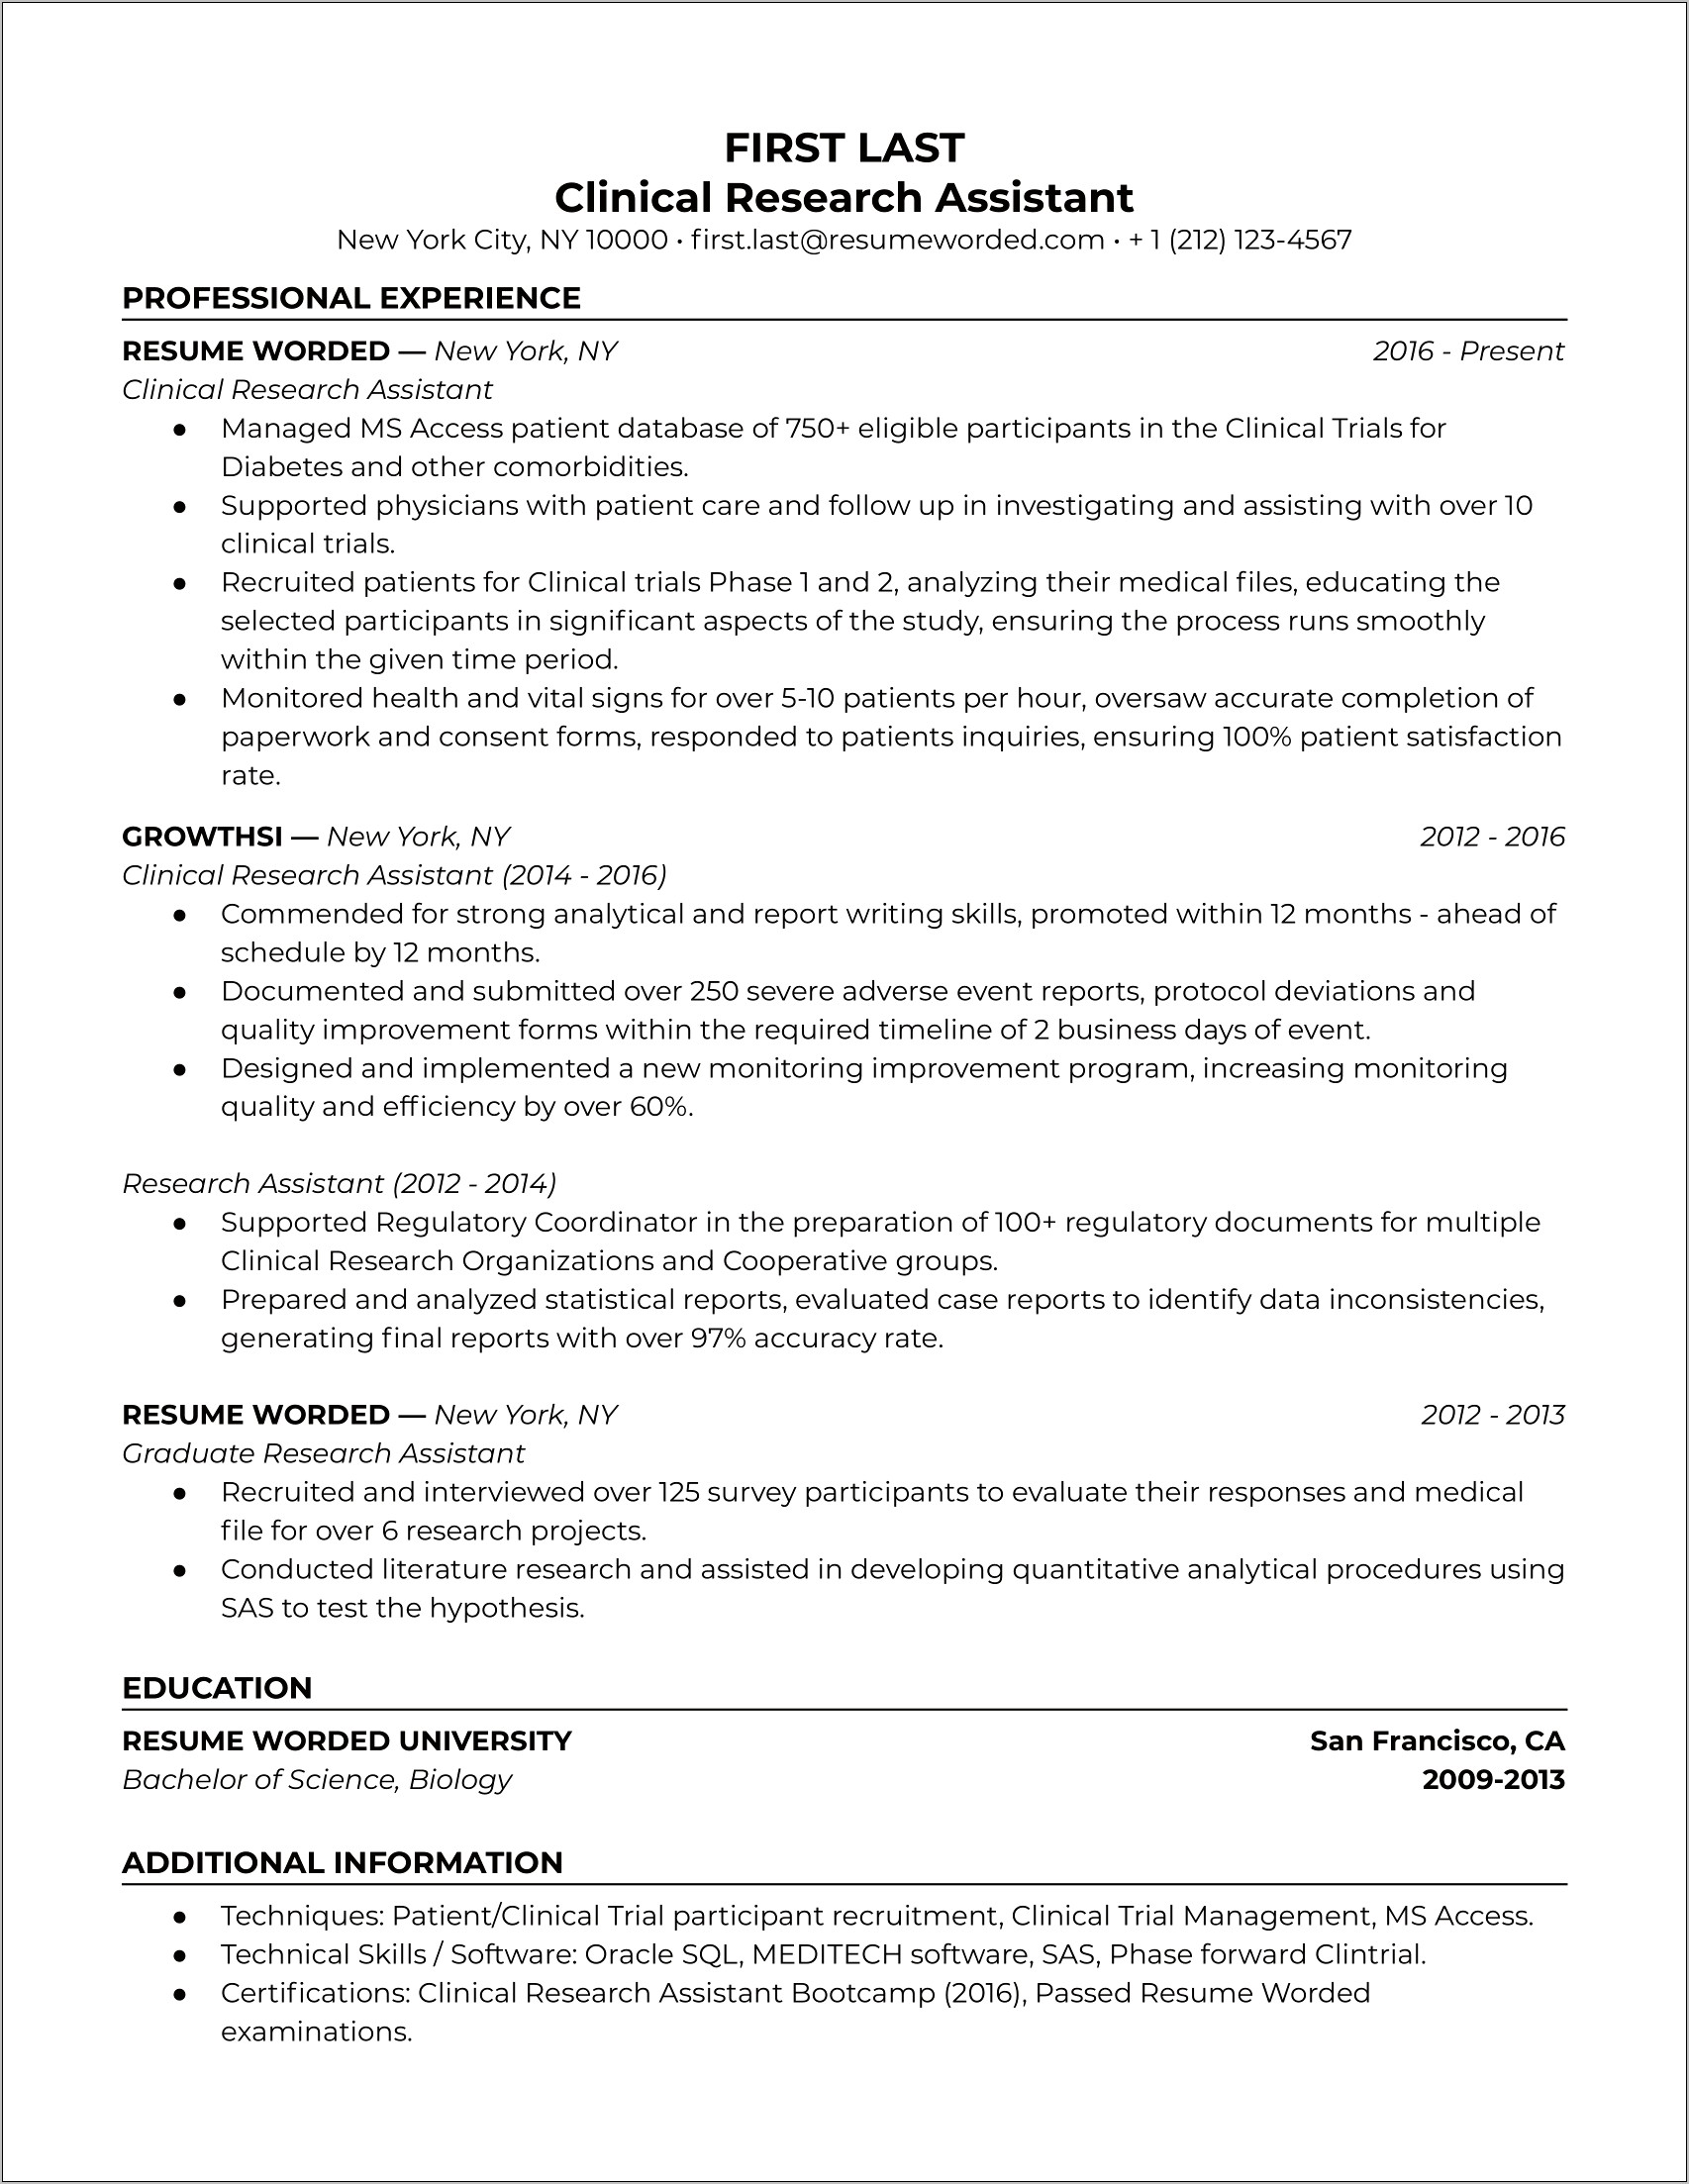 Additional Skills For Executive Assistant Resume